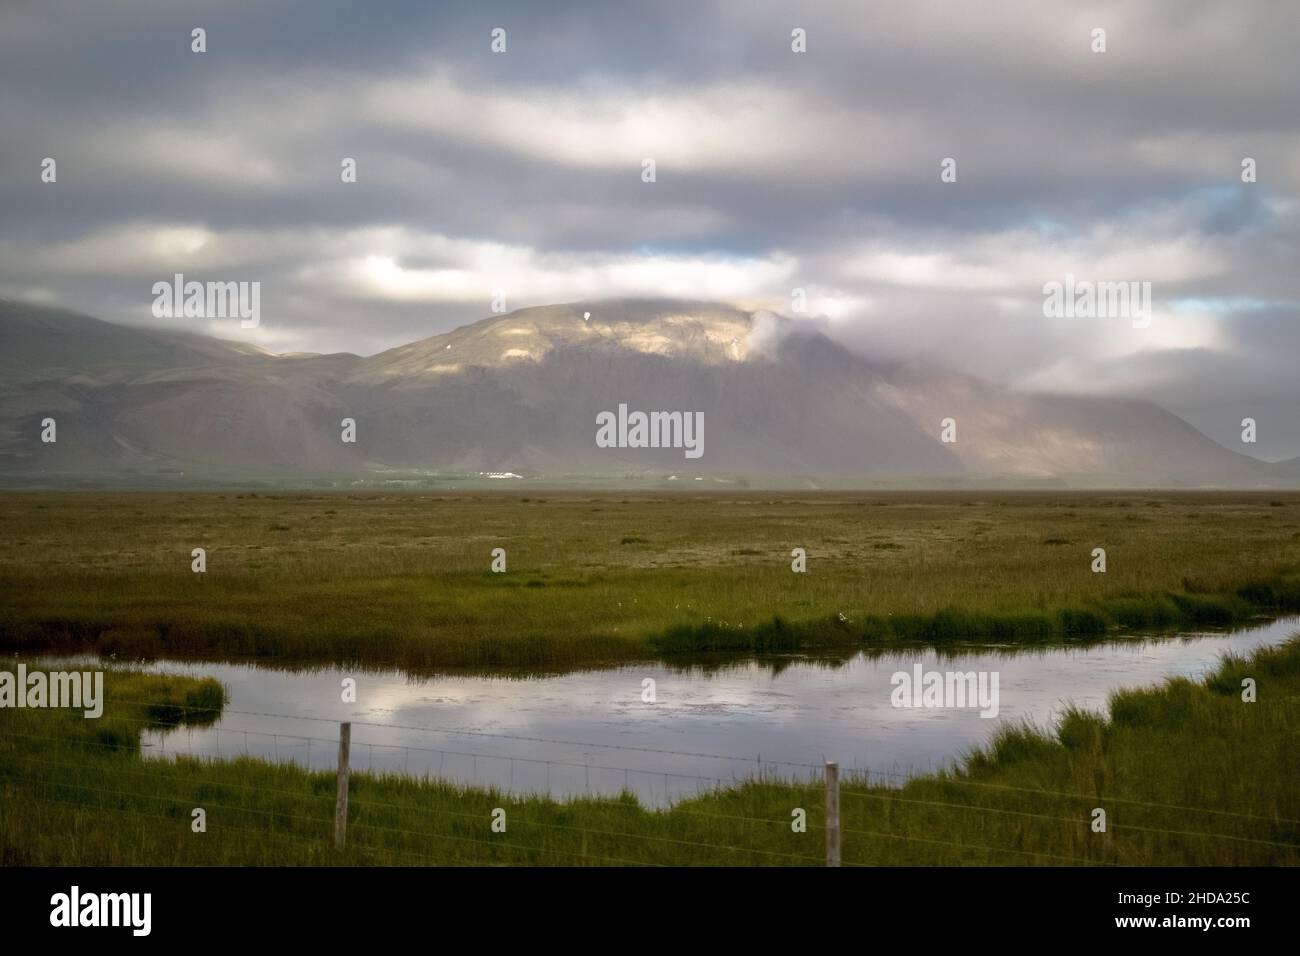 Mountain lake in Iceland on a cloudy day Stock Photo